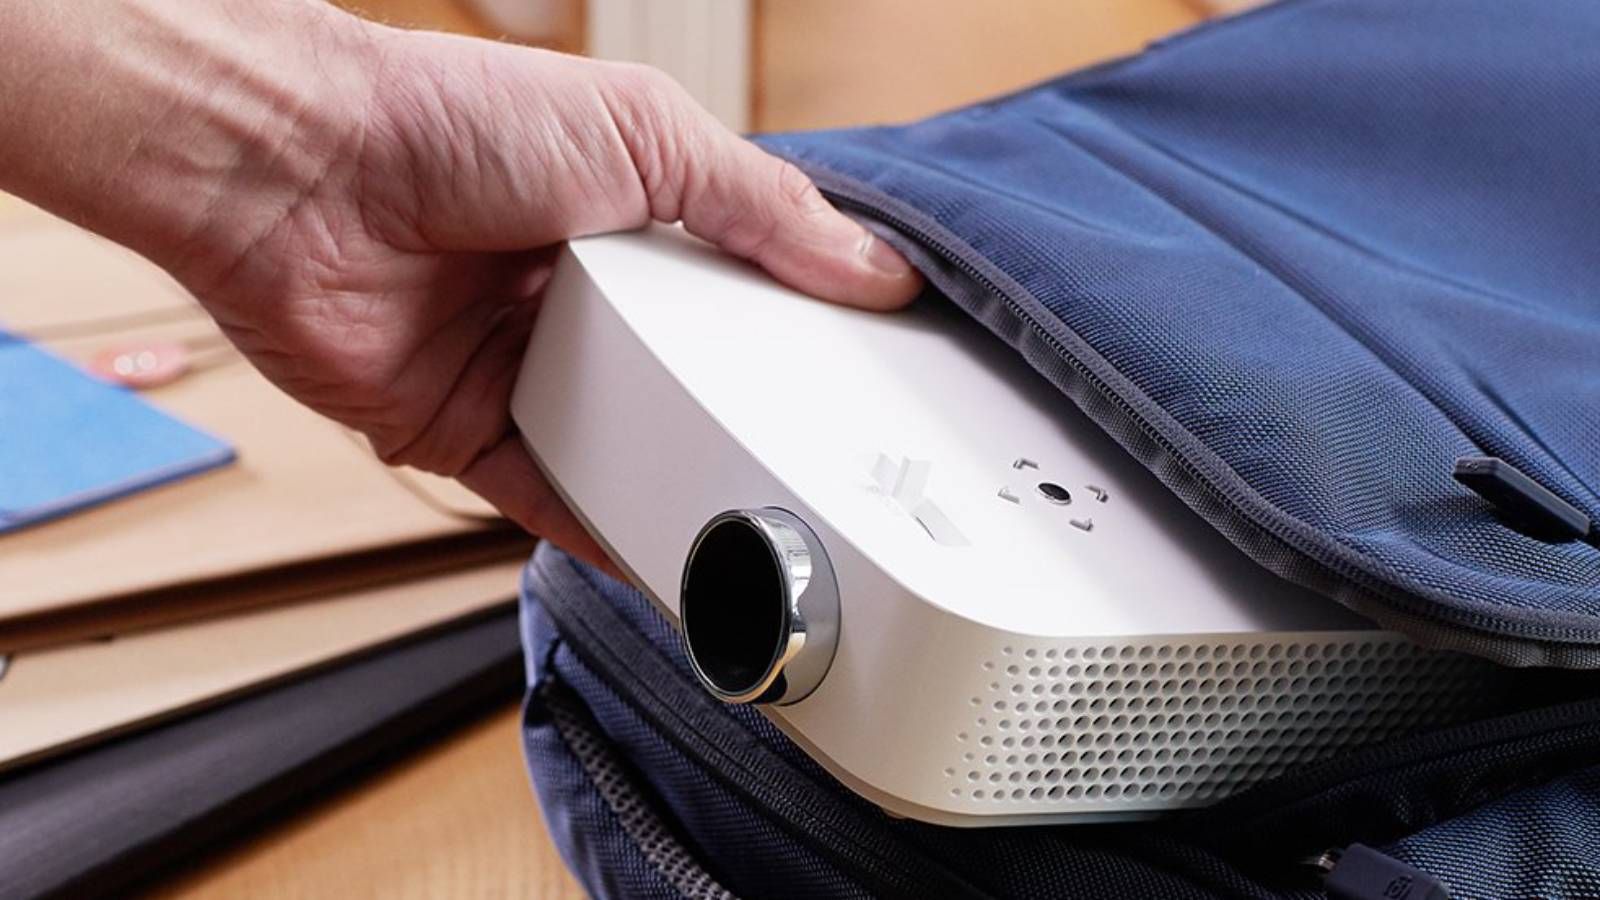 Hand pulling out an LG portable projector out of a bag.